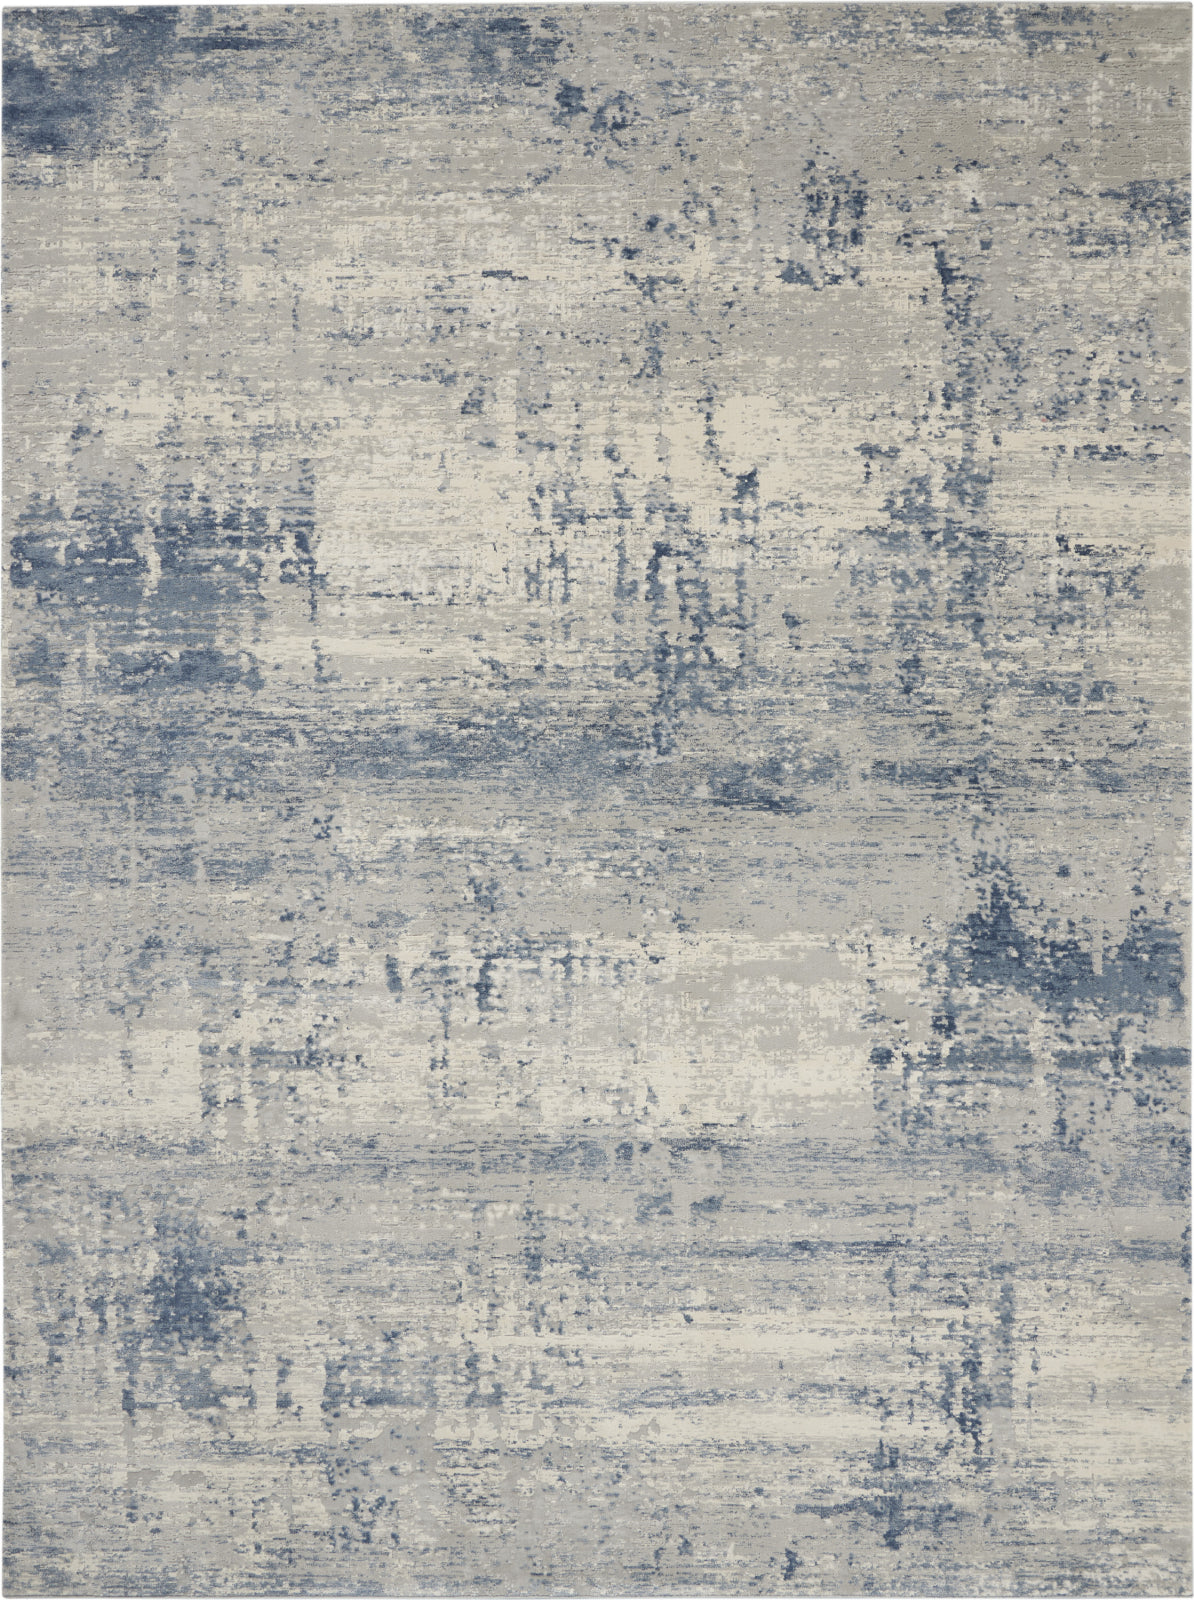 Rustic Textures Incredible Rugs Area Rug – Decor and Nourison Blue/Ivory by RUS02